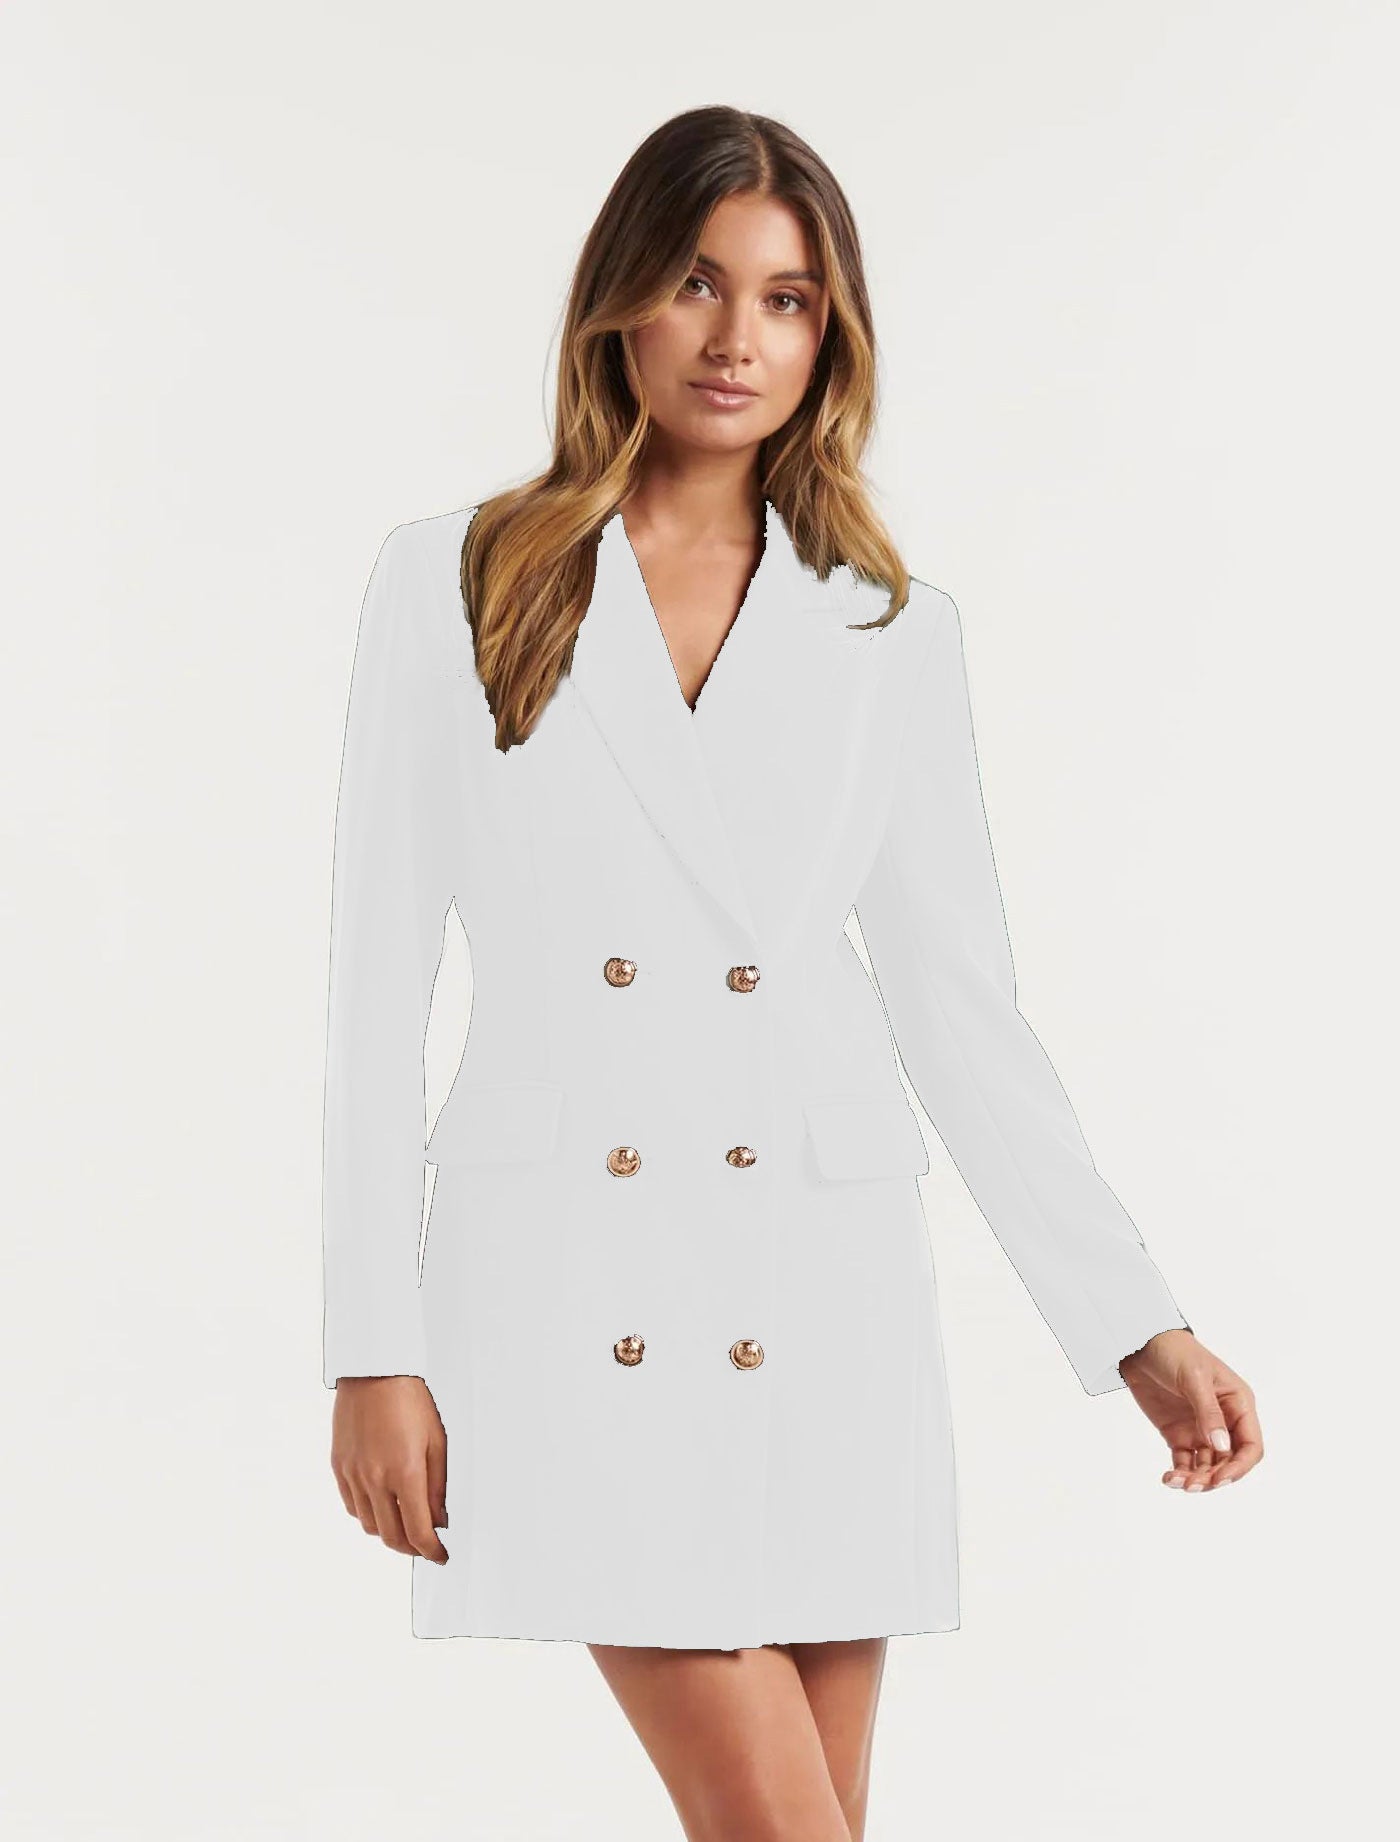 Slim Solid Color Casual Double Breasted Mid-Length Blazer Coat Dress